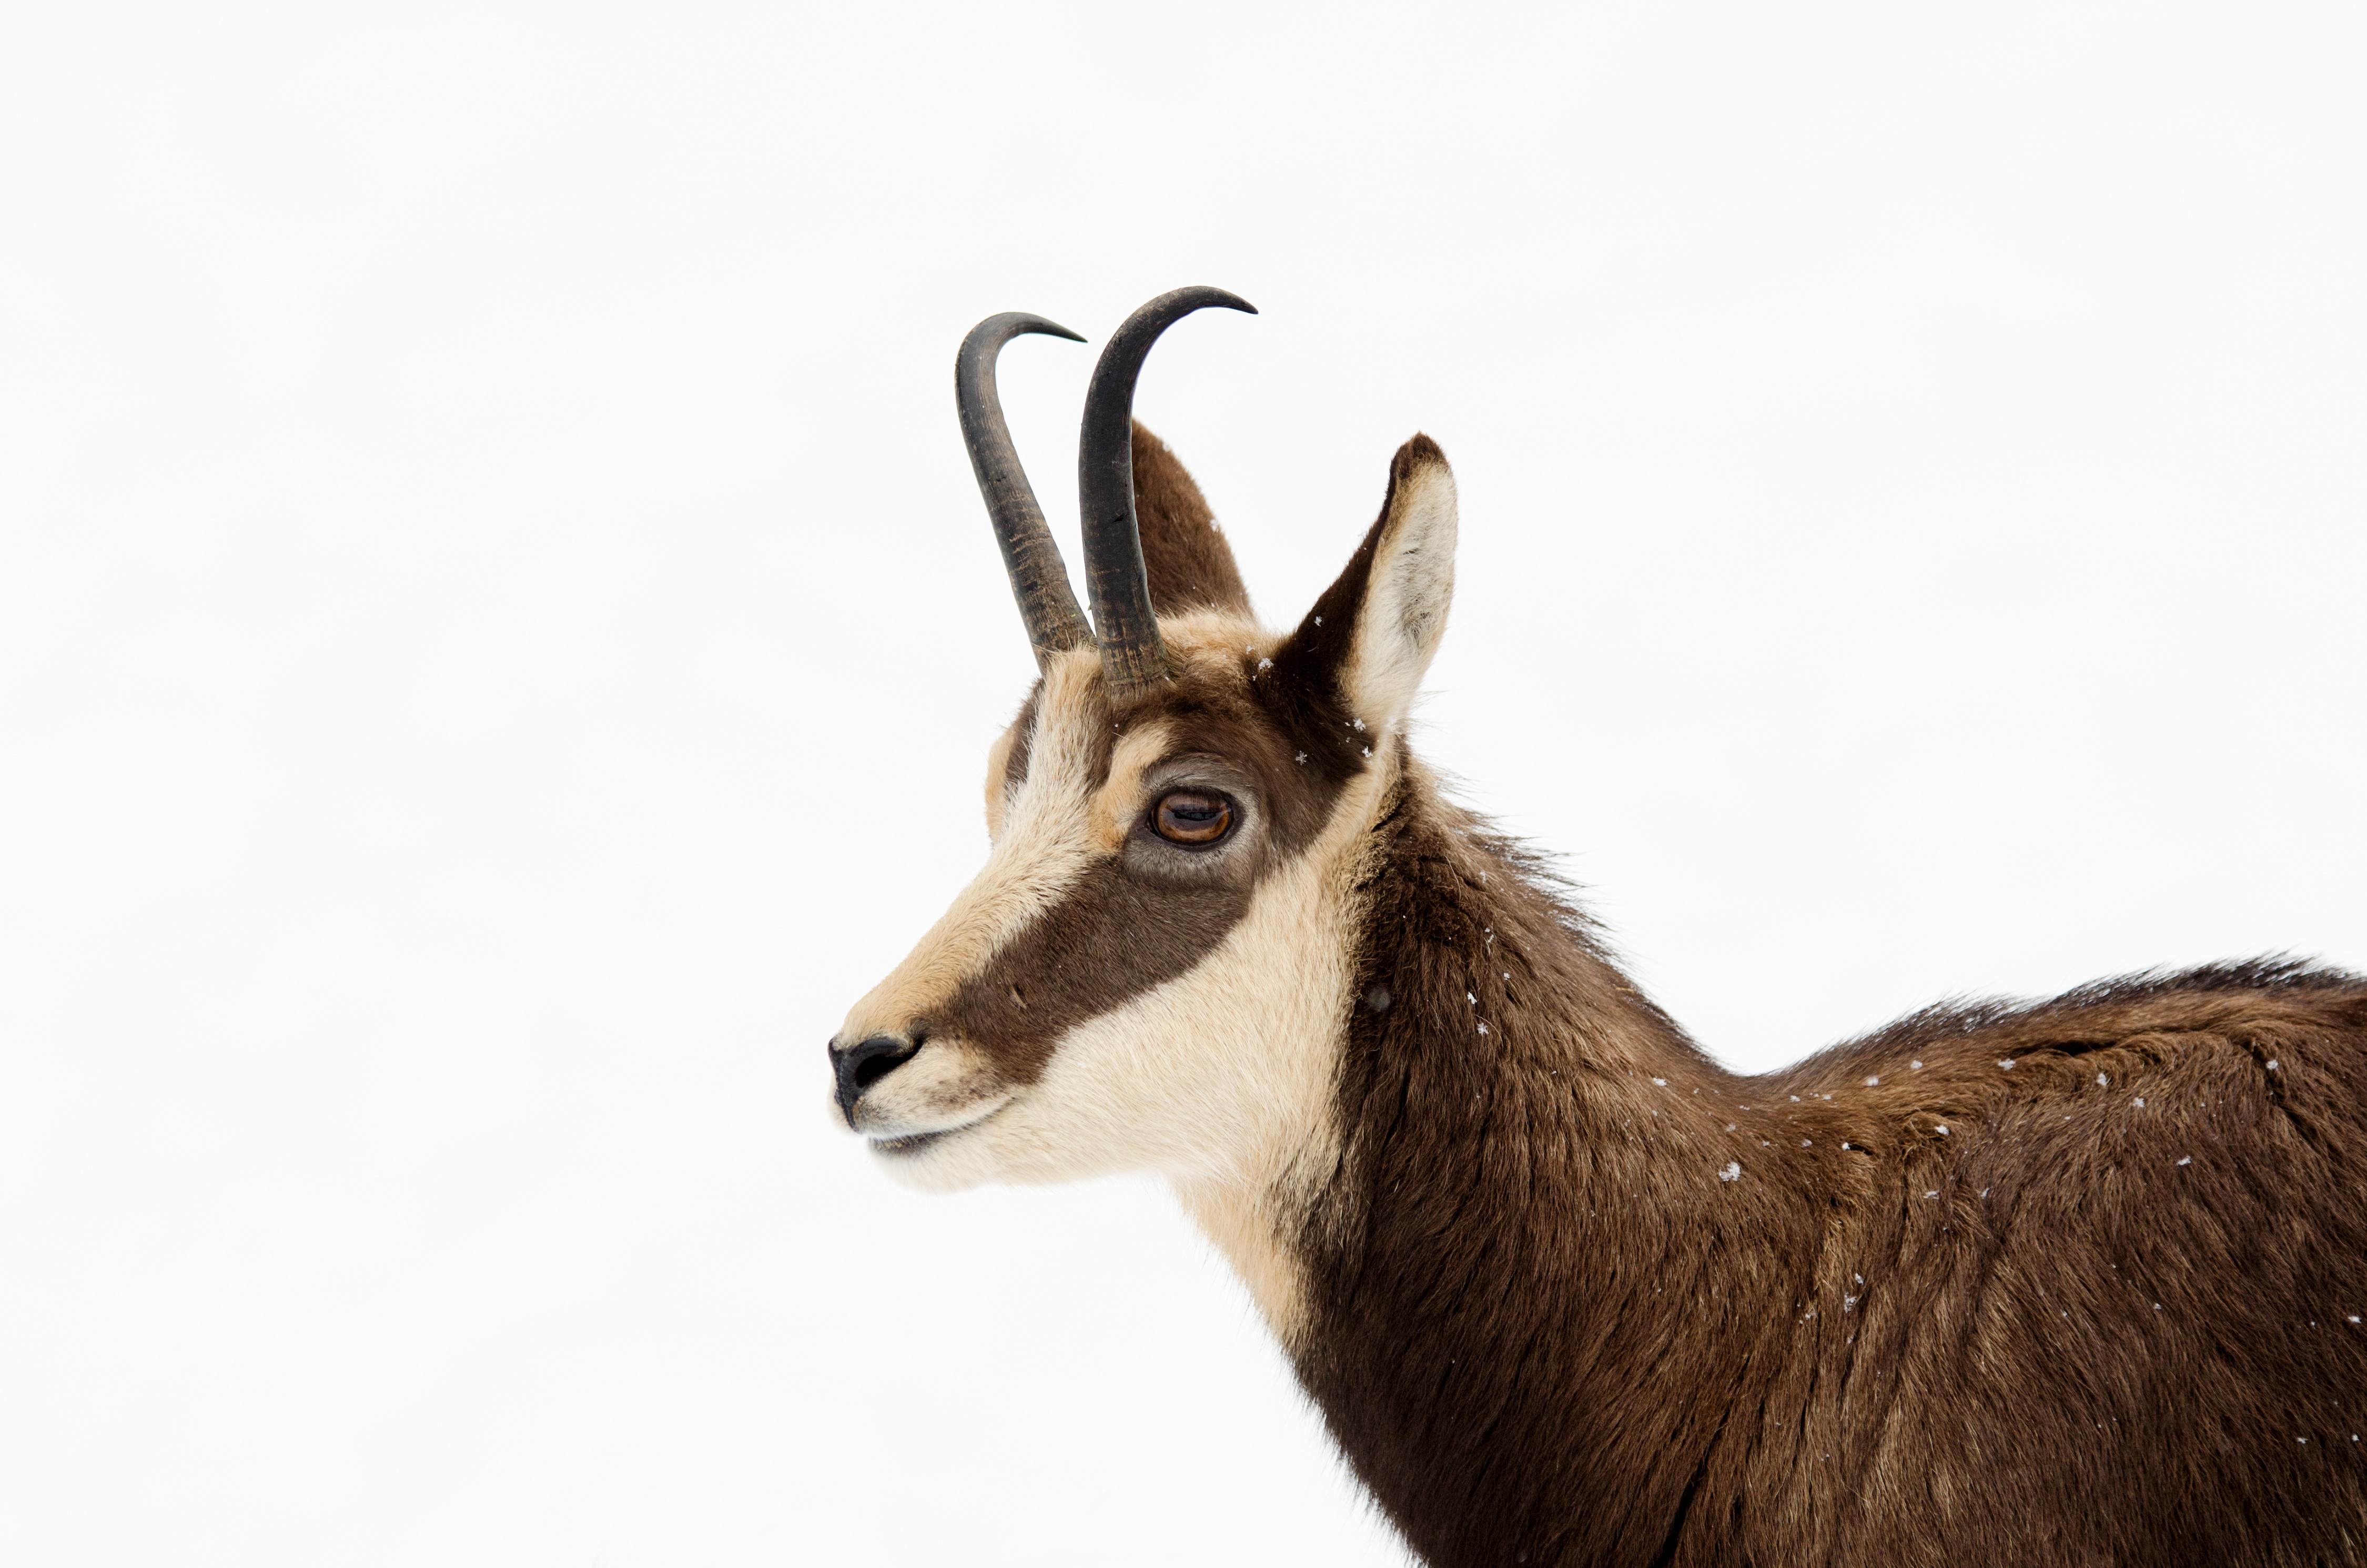 The chamois is a species of goat-antelope by strichpunkt